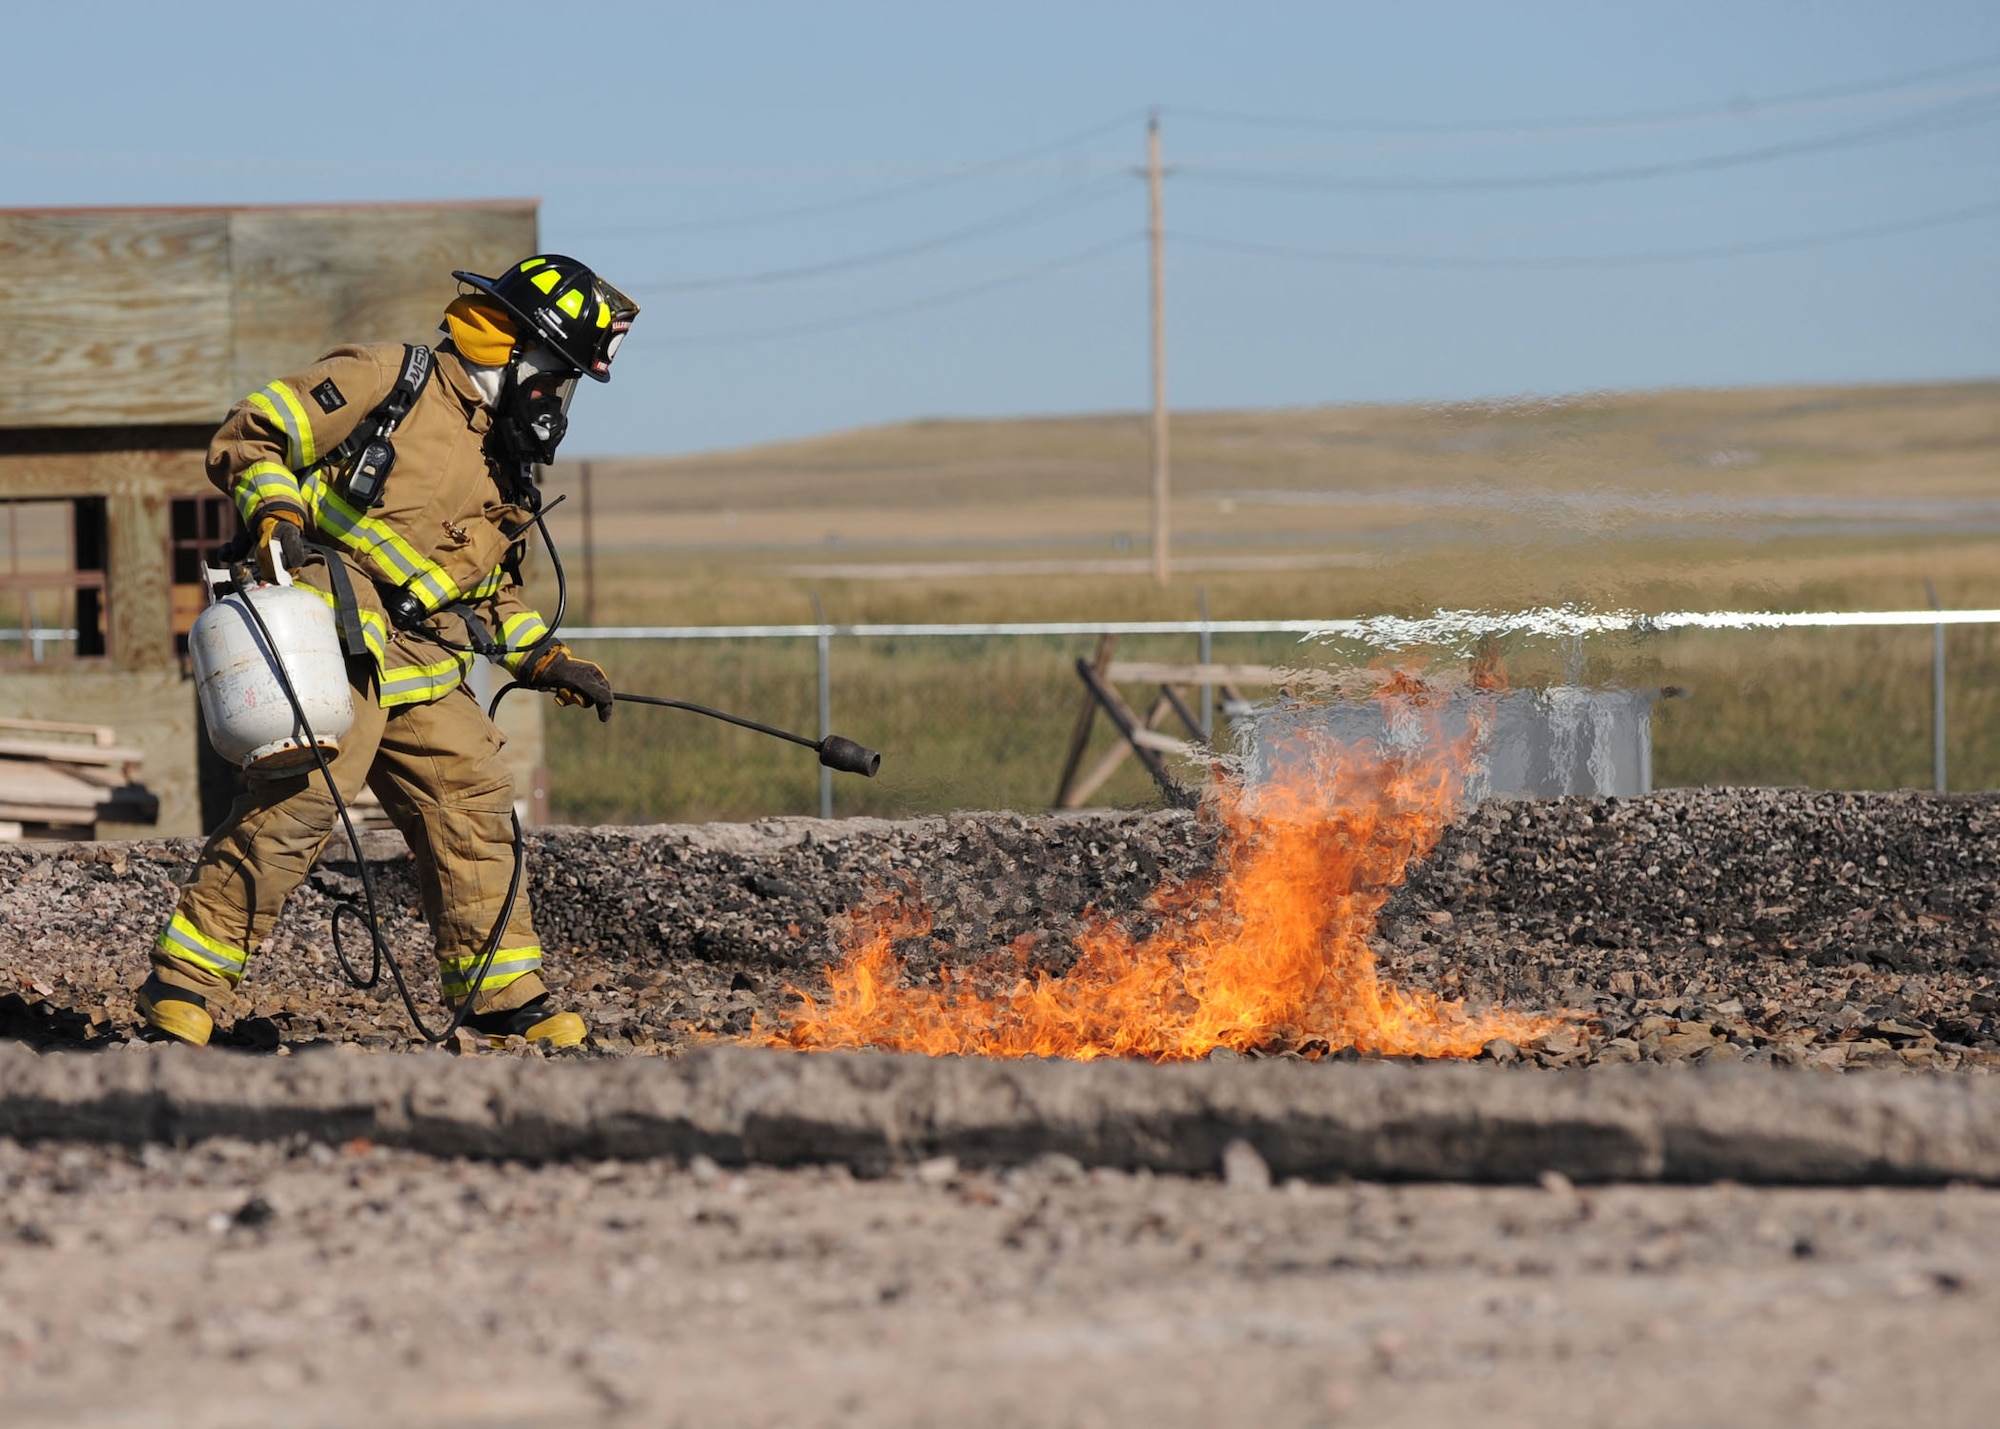 Jeremiah Hanna-Cruz, 28th Civil Engineer Squadron fire safety driver operator, ignites a fire in the base fire pit training area during a simulated aircraft fire training exercise at Ellsworth Air Force Base, S.D., Sept. 18, 2013. Ellsworth firefighters periodically conduct fire pit training in an effort to ensure all fire crews are prepared to respond to emergencies that occur during real world contingencies. (U.S. Air Force photo by Airman 1st Class Rebecca Imwalle / Released)